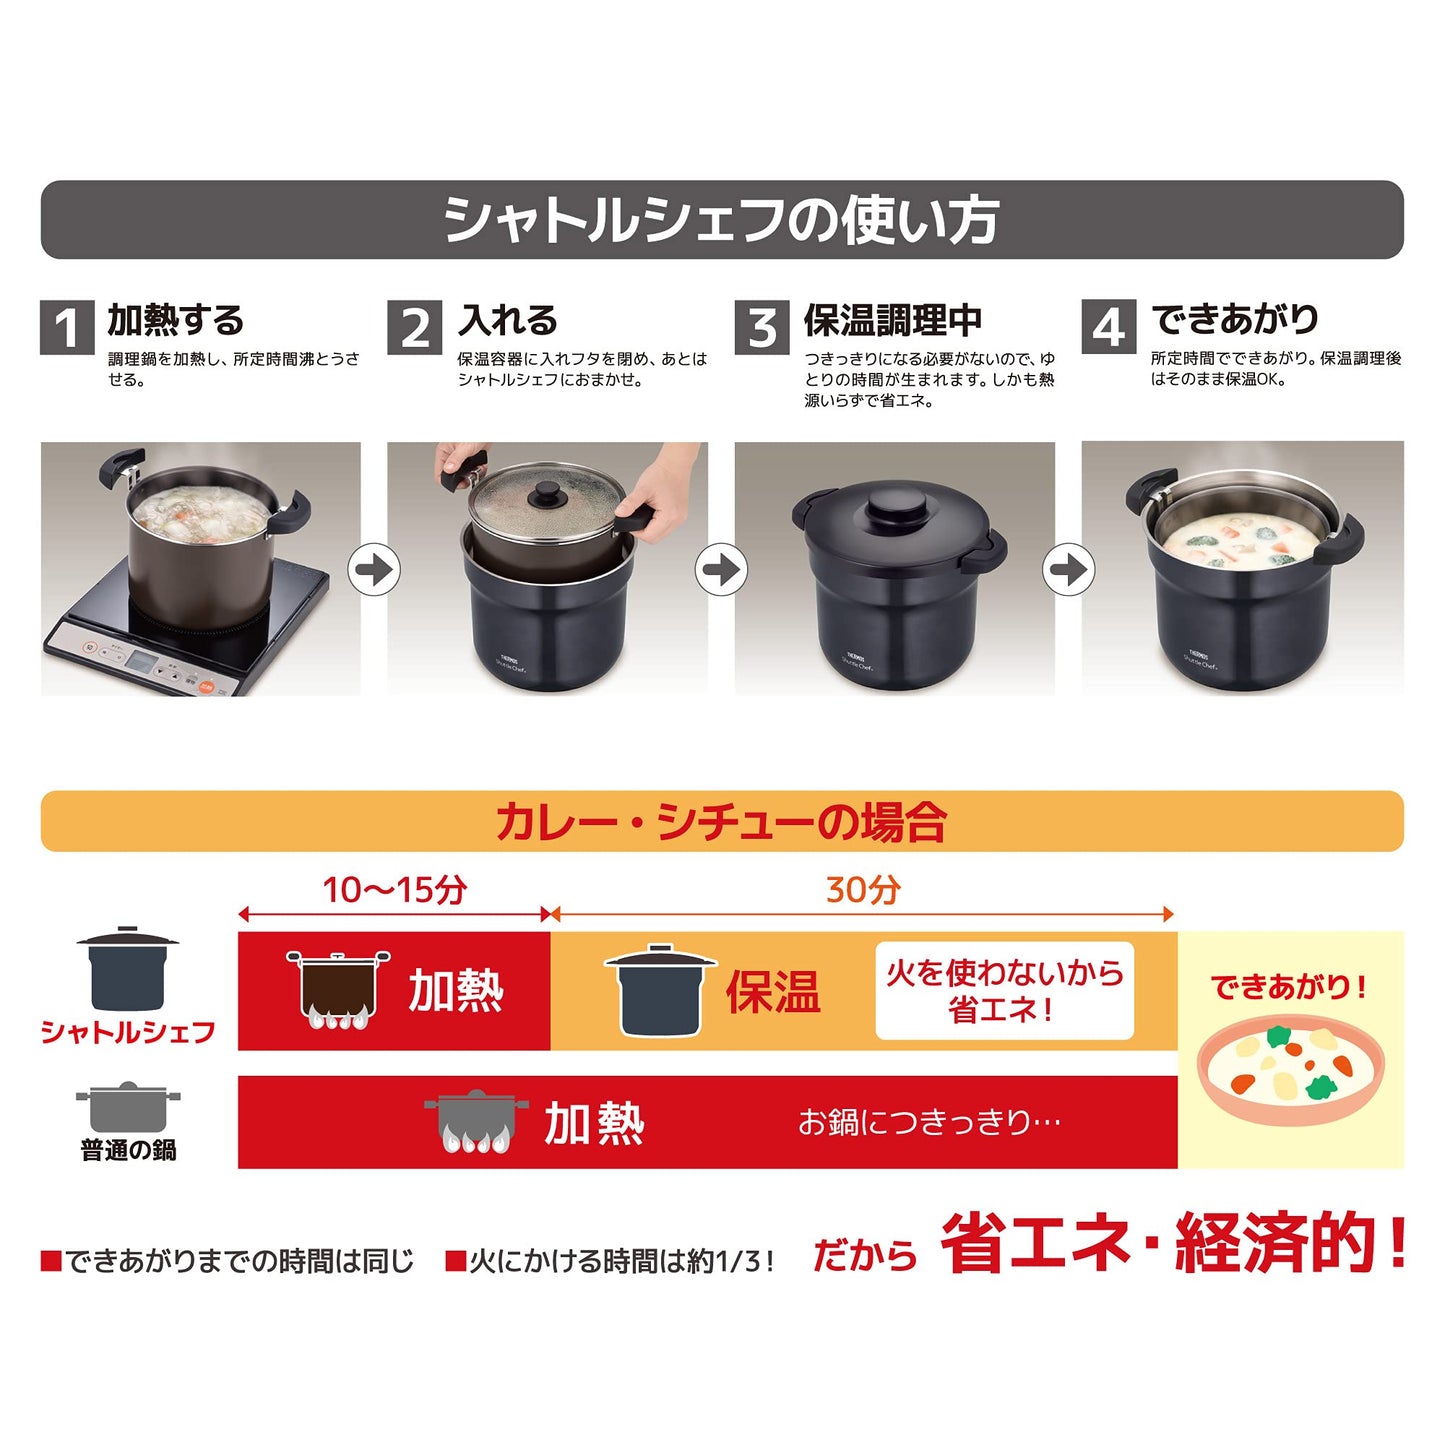 Thermos vacuum insulation cooker shuttle chef 4.3L (for 4-6 people) KBJ-4501 CGY